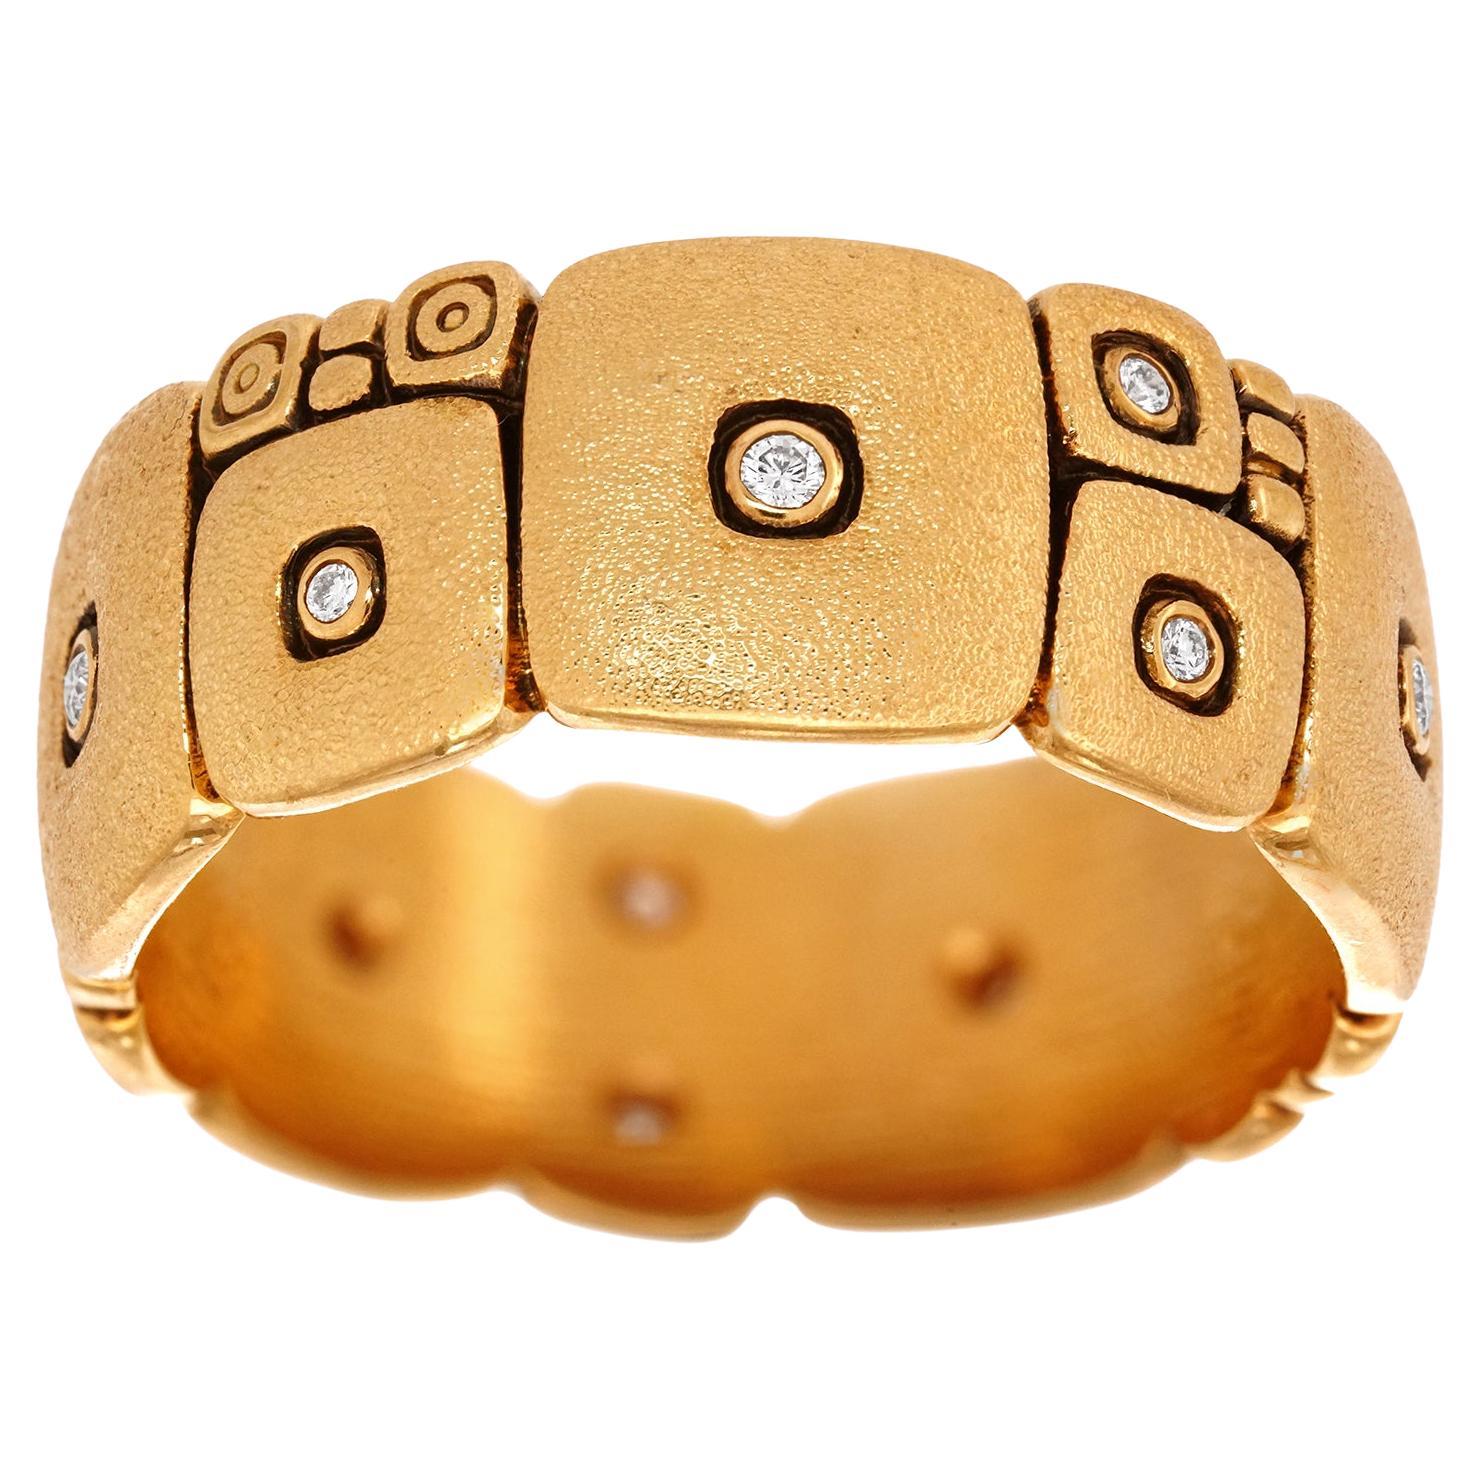 Alex Sepkus "Temple Wall" Ring 18k For Sale